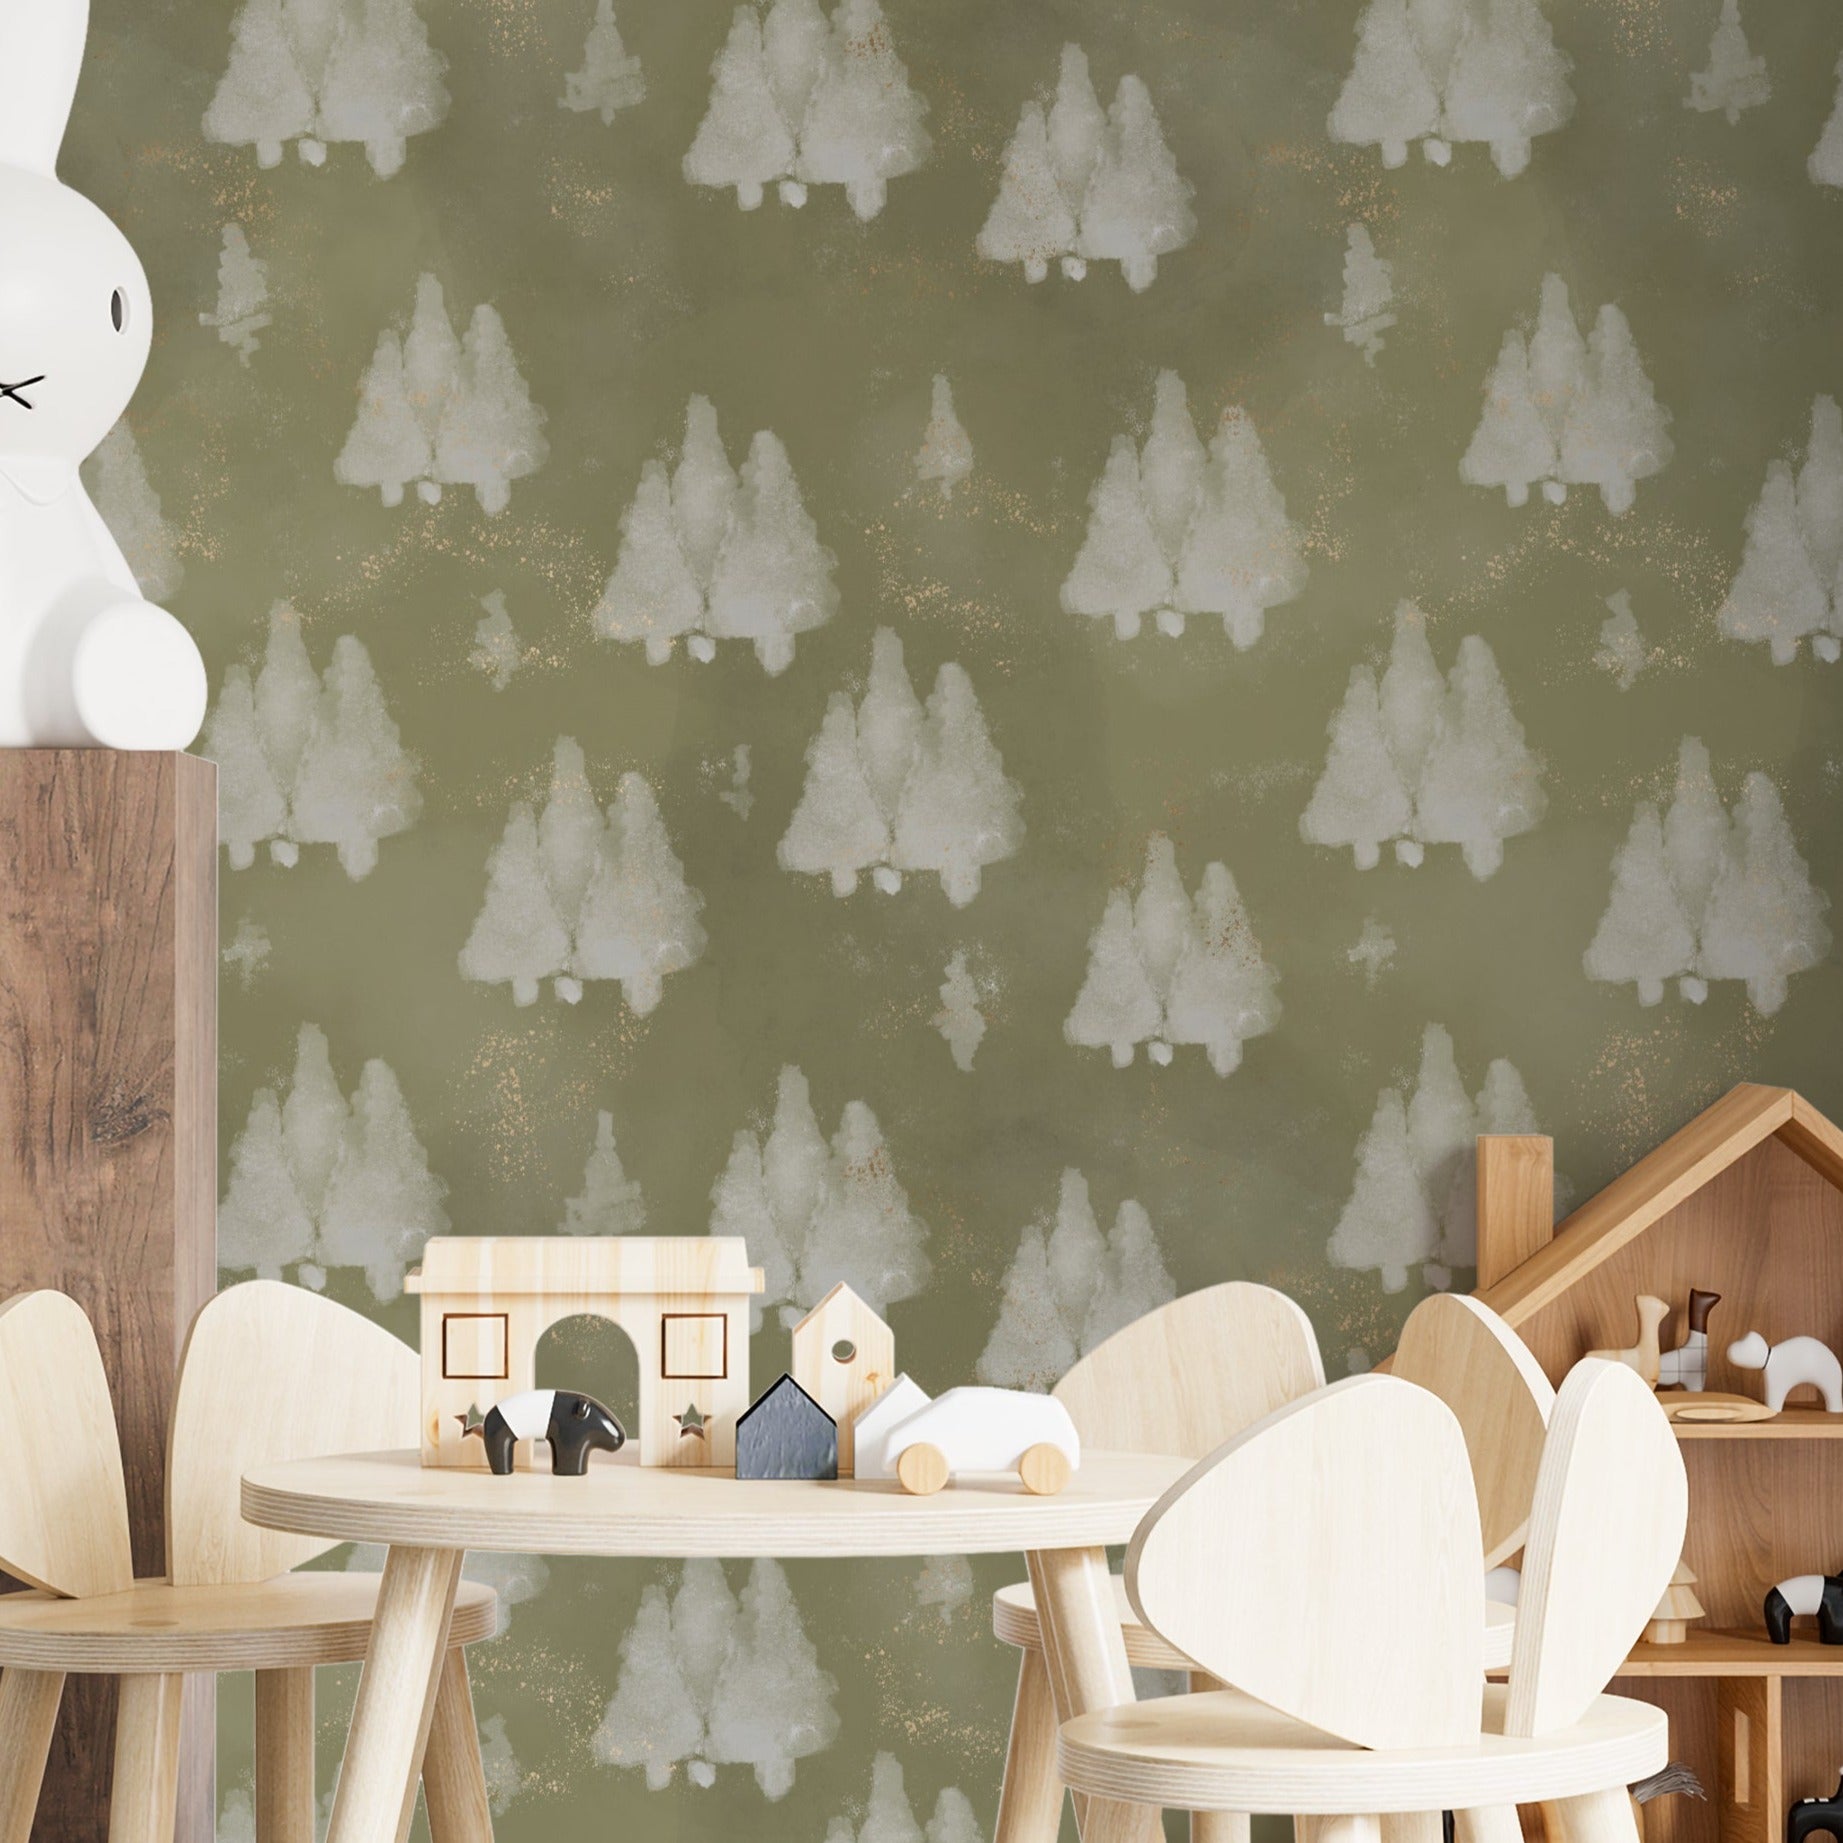 A children’s play area adorned with Shimmer Tree Wallpaper, featuring gentle white trees on an olive green background with subtle gold flecks. The scene is set for creative play with wooden toys and comfortable seating, making it a perfect backdrop for a nursery or playroom